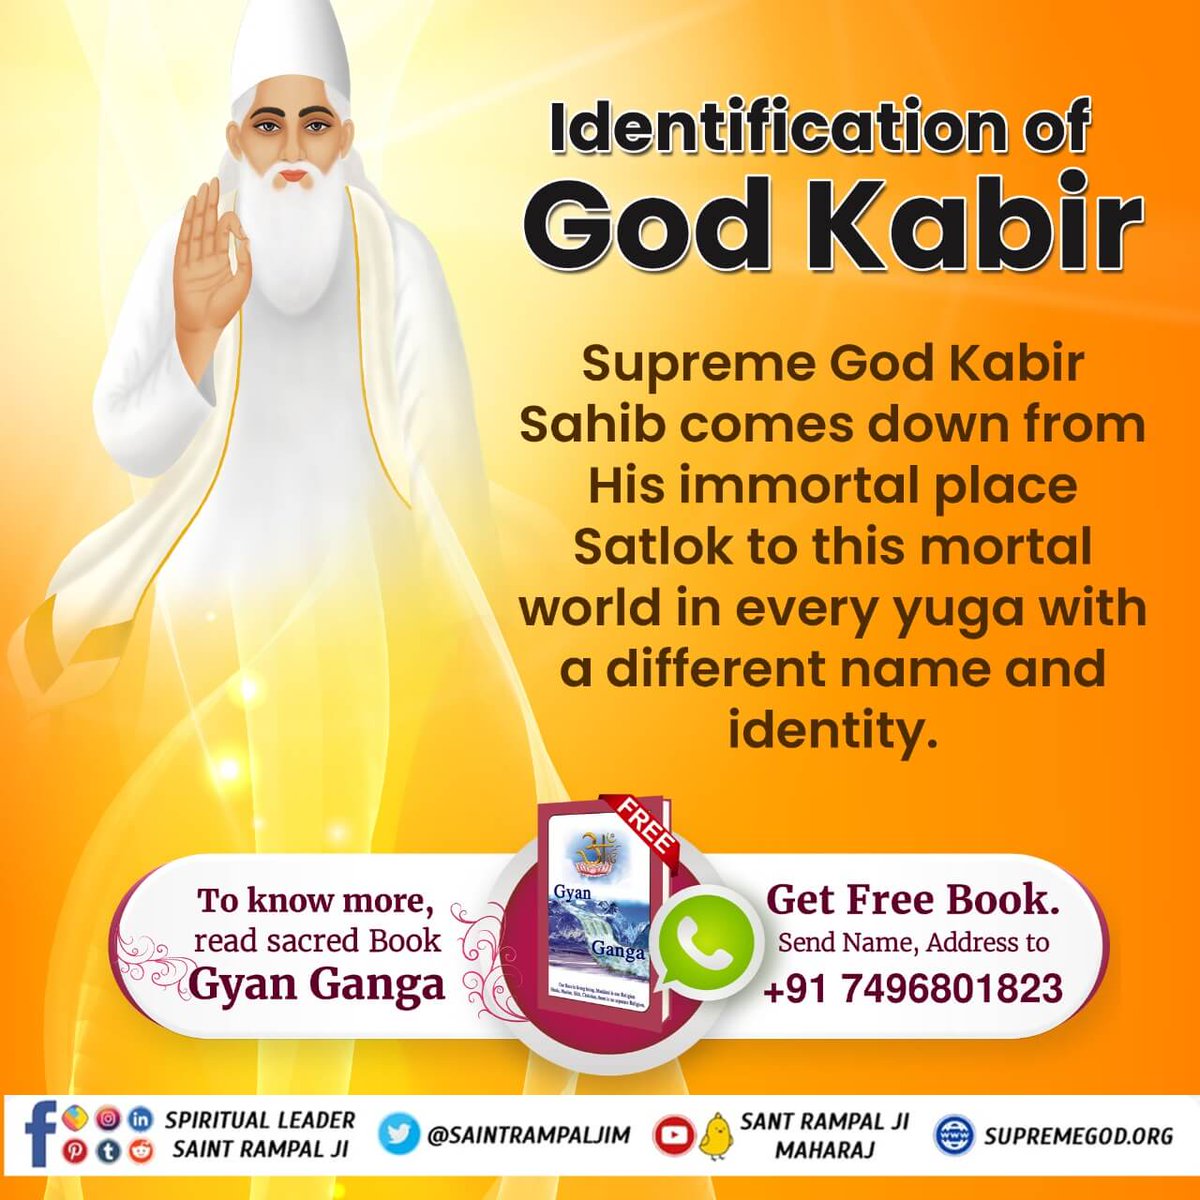 #godmorningfriday
God KabirSupreme God Kabir Sahib comes down from His immortal place Satlok to this mortal world in every yuga with a different name and identity.
#SantRampaljiQuotes